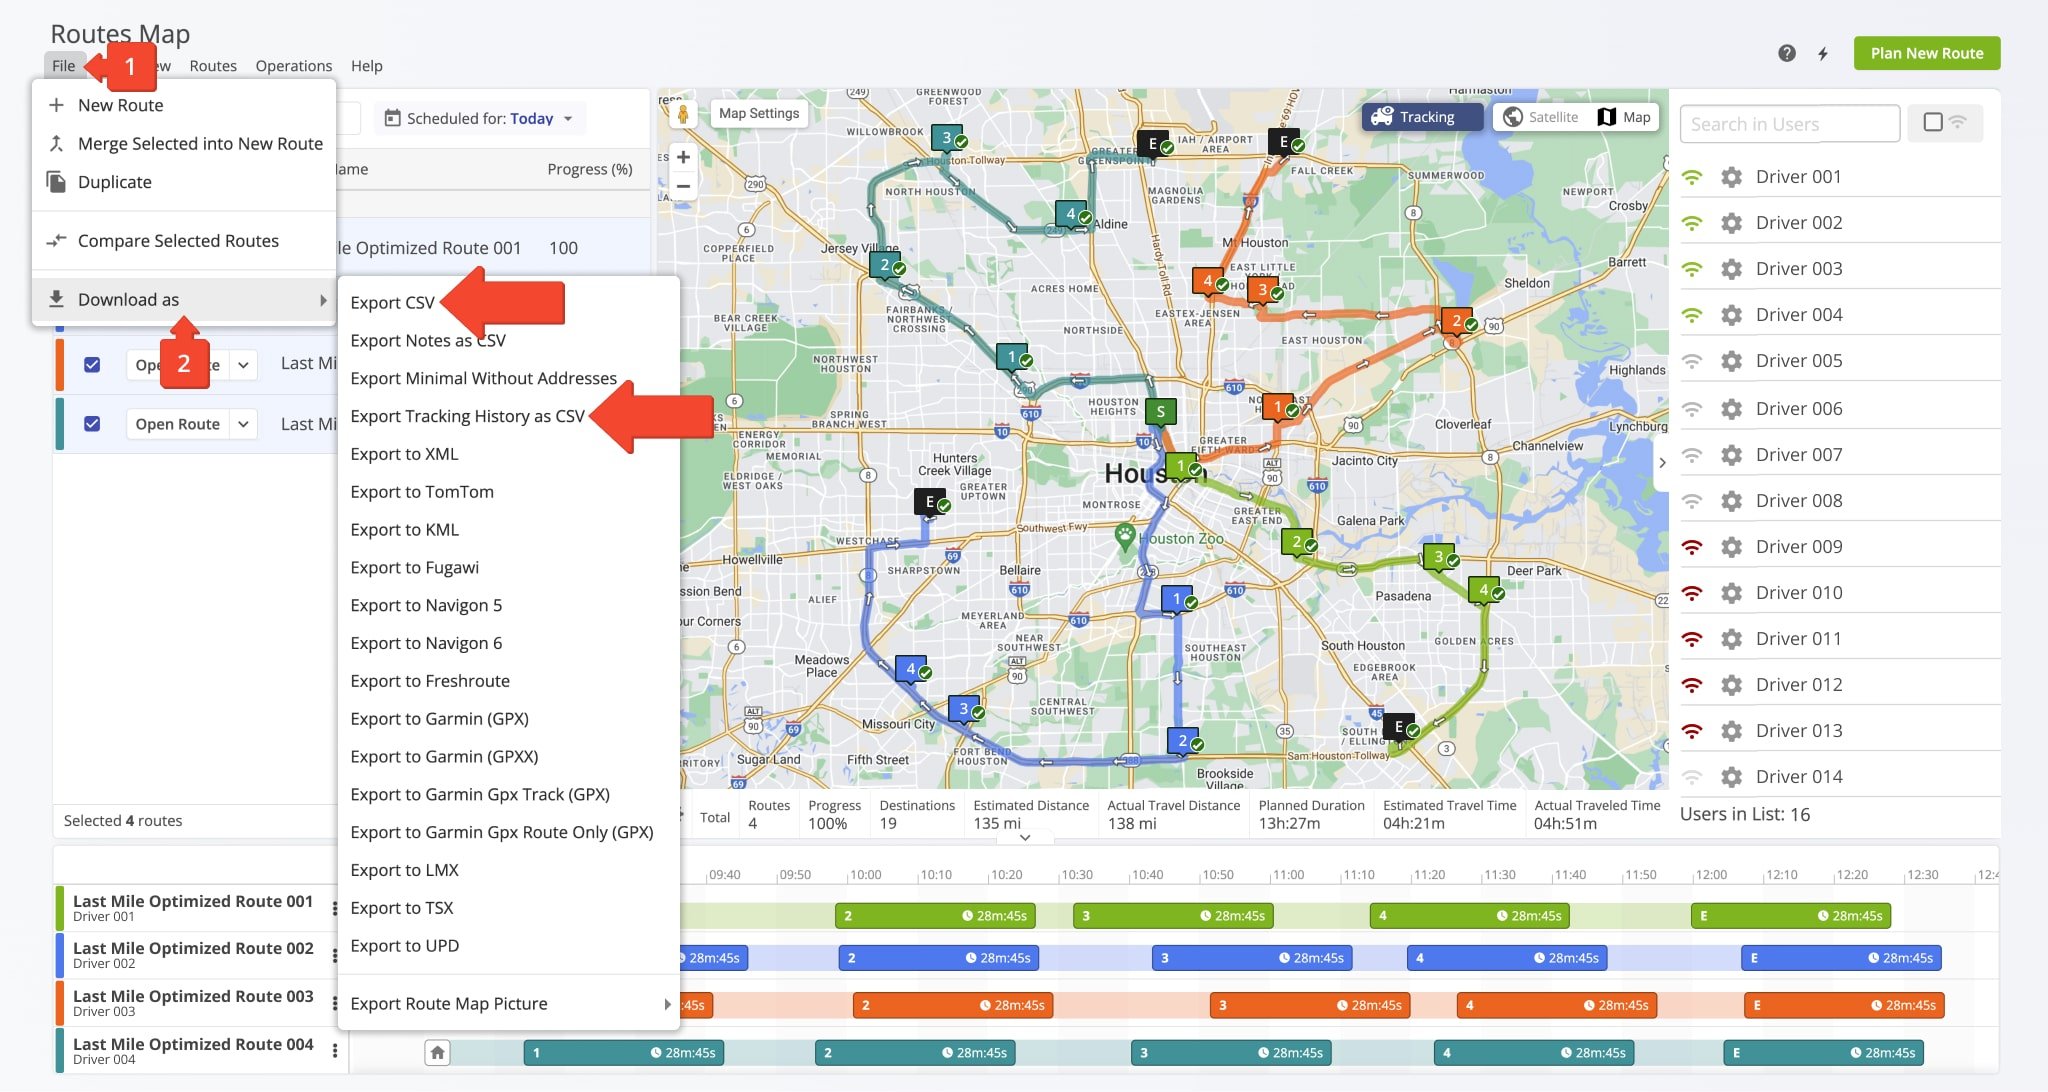 Route4Me enables you to export GPS route tracking data for multiple routes from the Routes Map as a customizable CSV spreadsheet where you can enable the preferred GPS analytics or a GPS tracking history CSV.